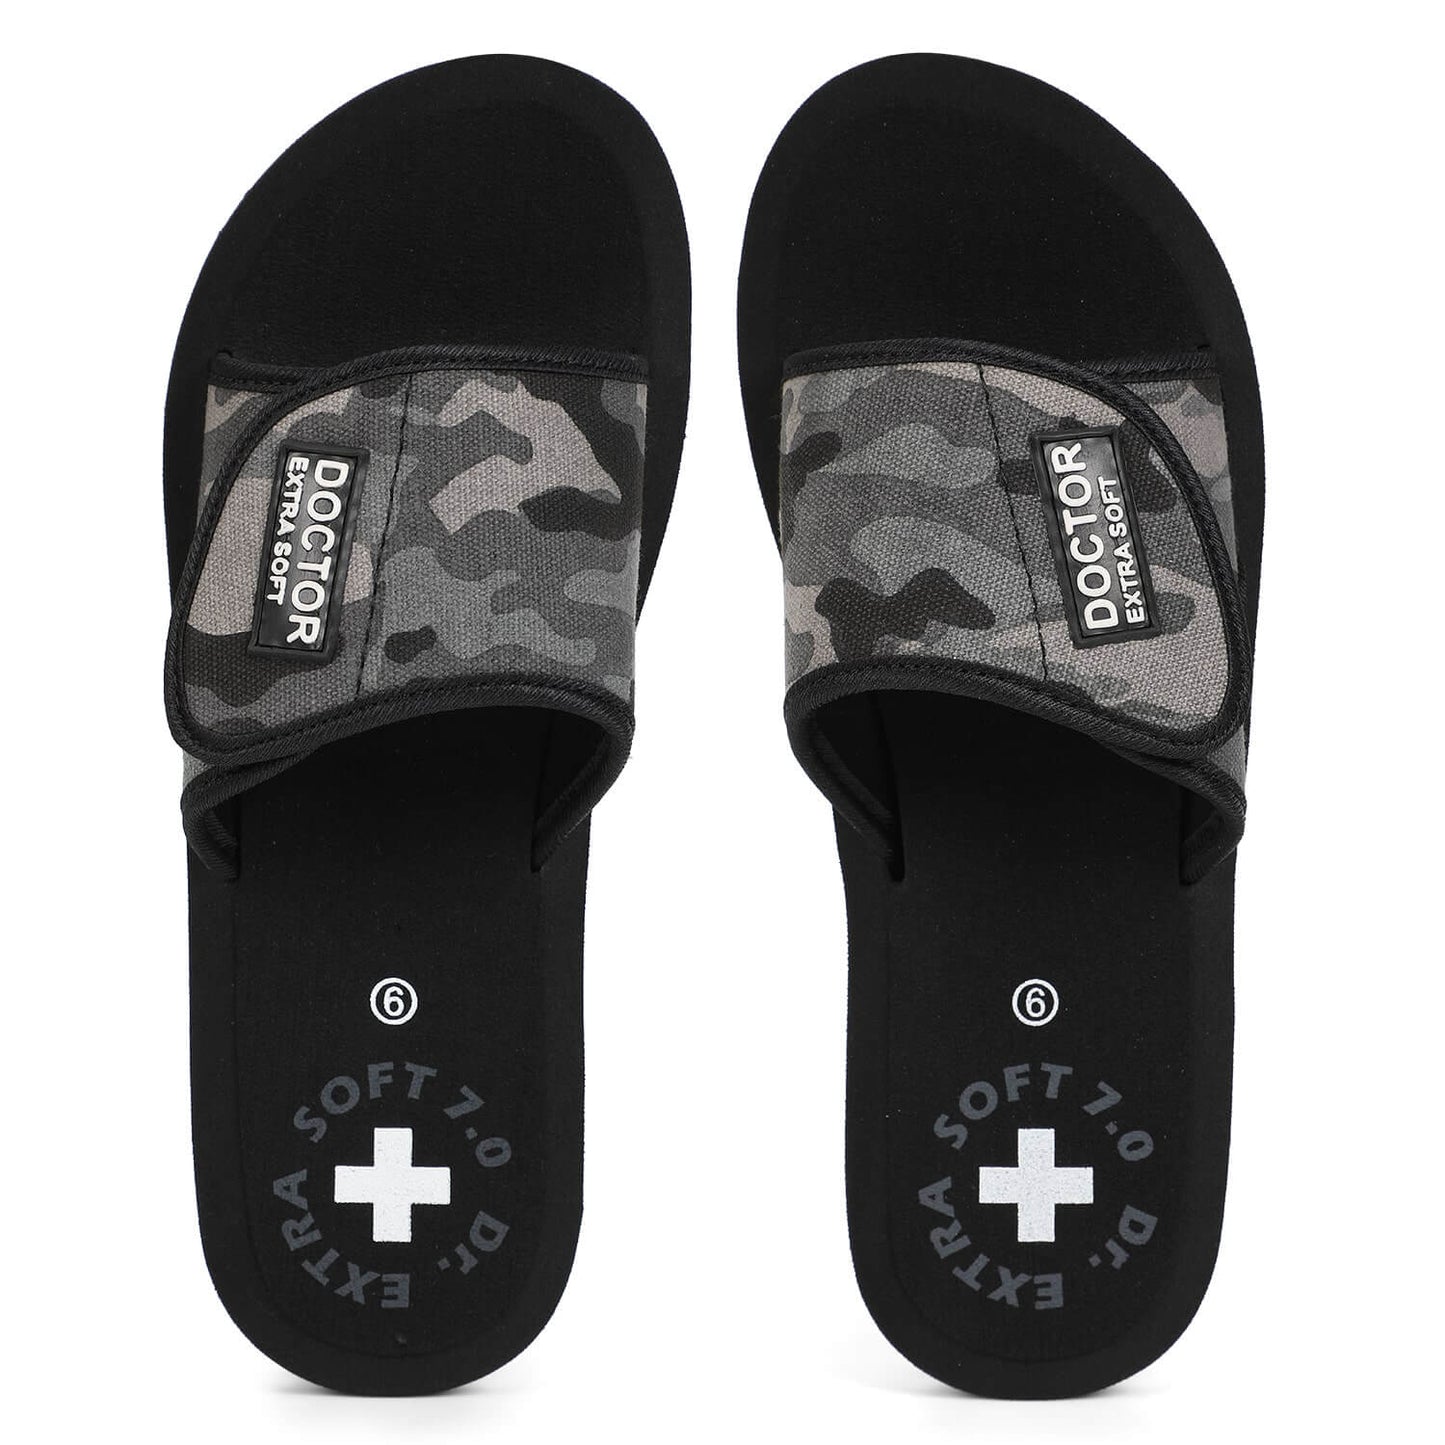 DOCTOR EXTRA SOFT D-54 Women's Camo Slippers Comfortable For Pregnancy Swelling With Adjustable Velcro Straps Camouflaged Sliders